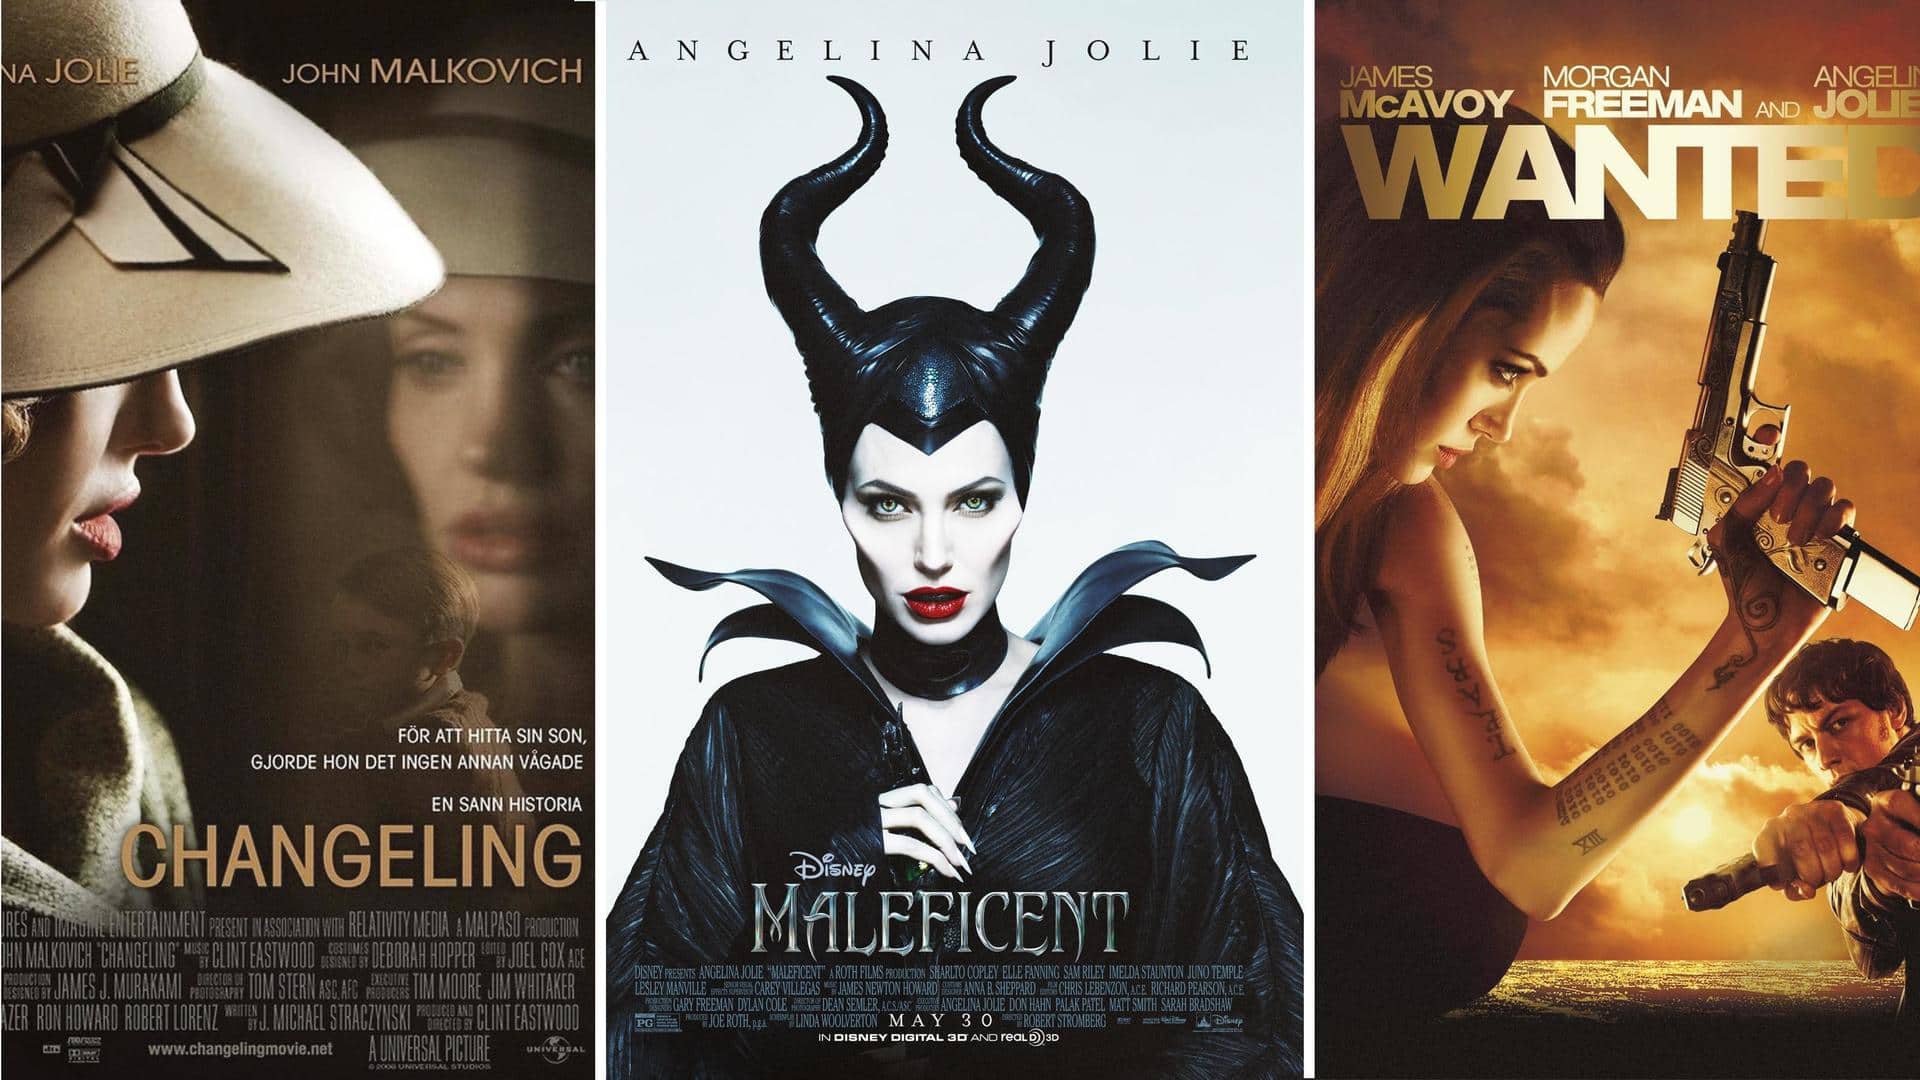 Top IMDb-rated Angelina Jolie films you can't miss